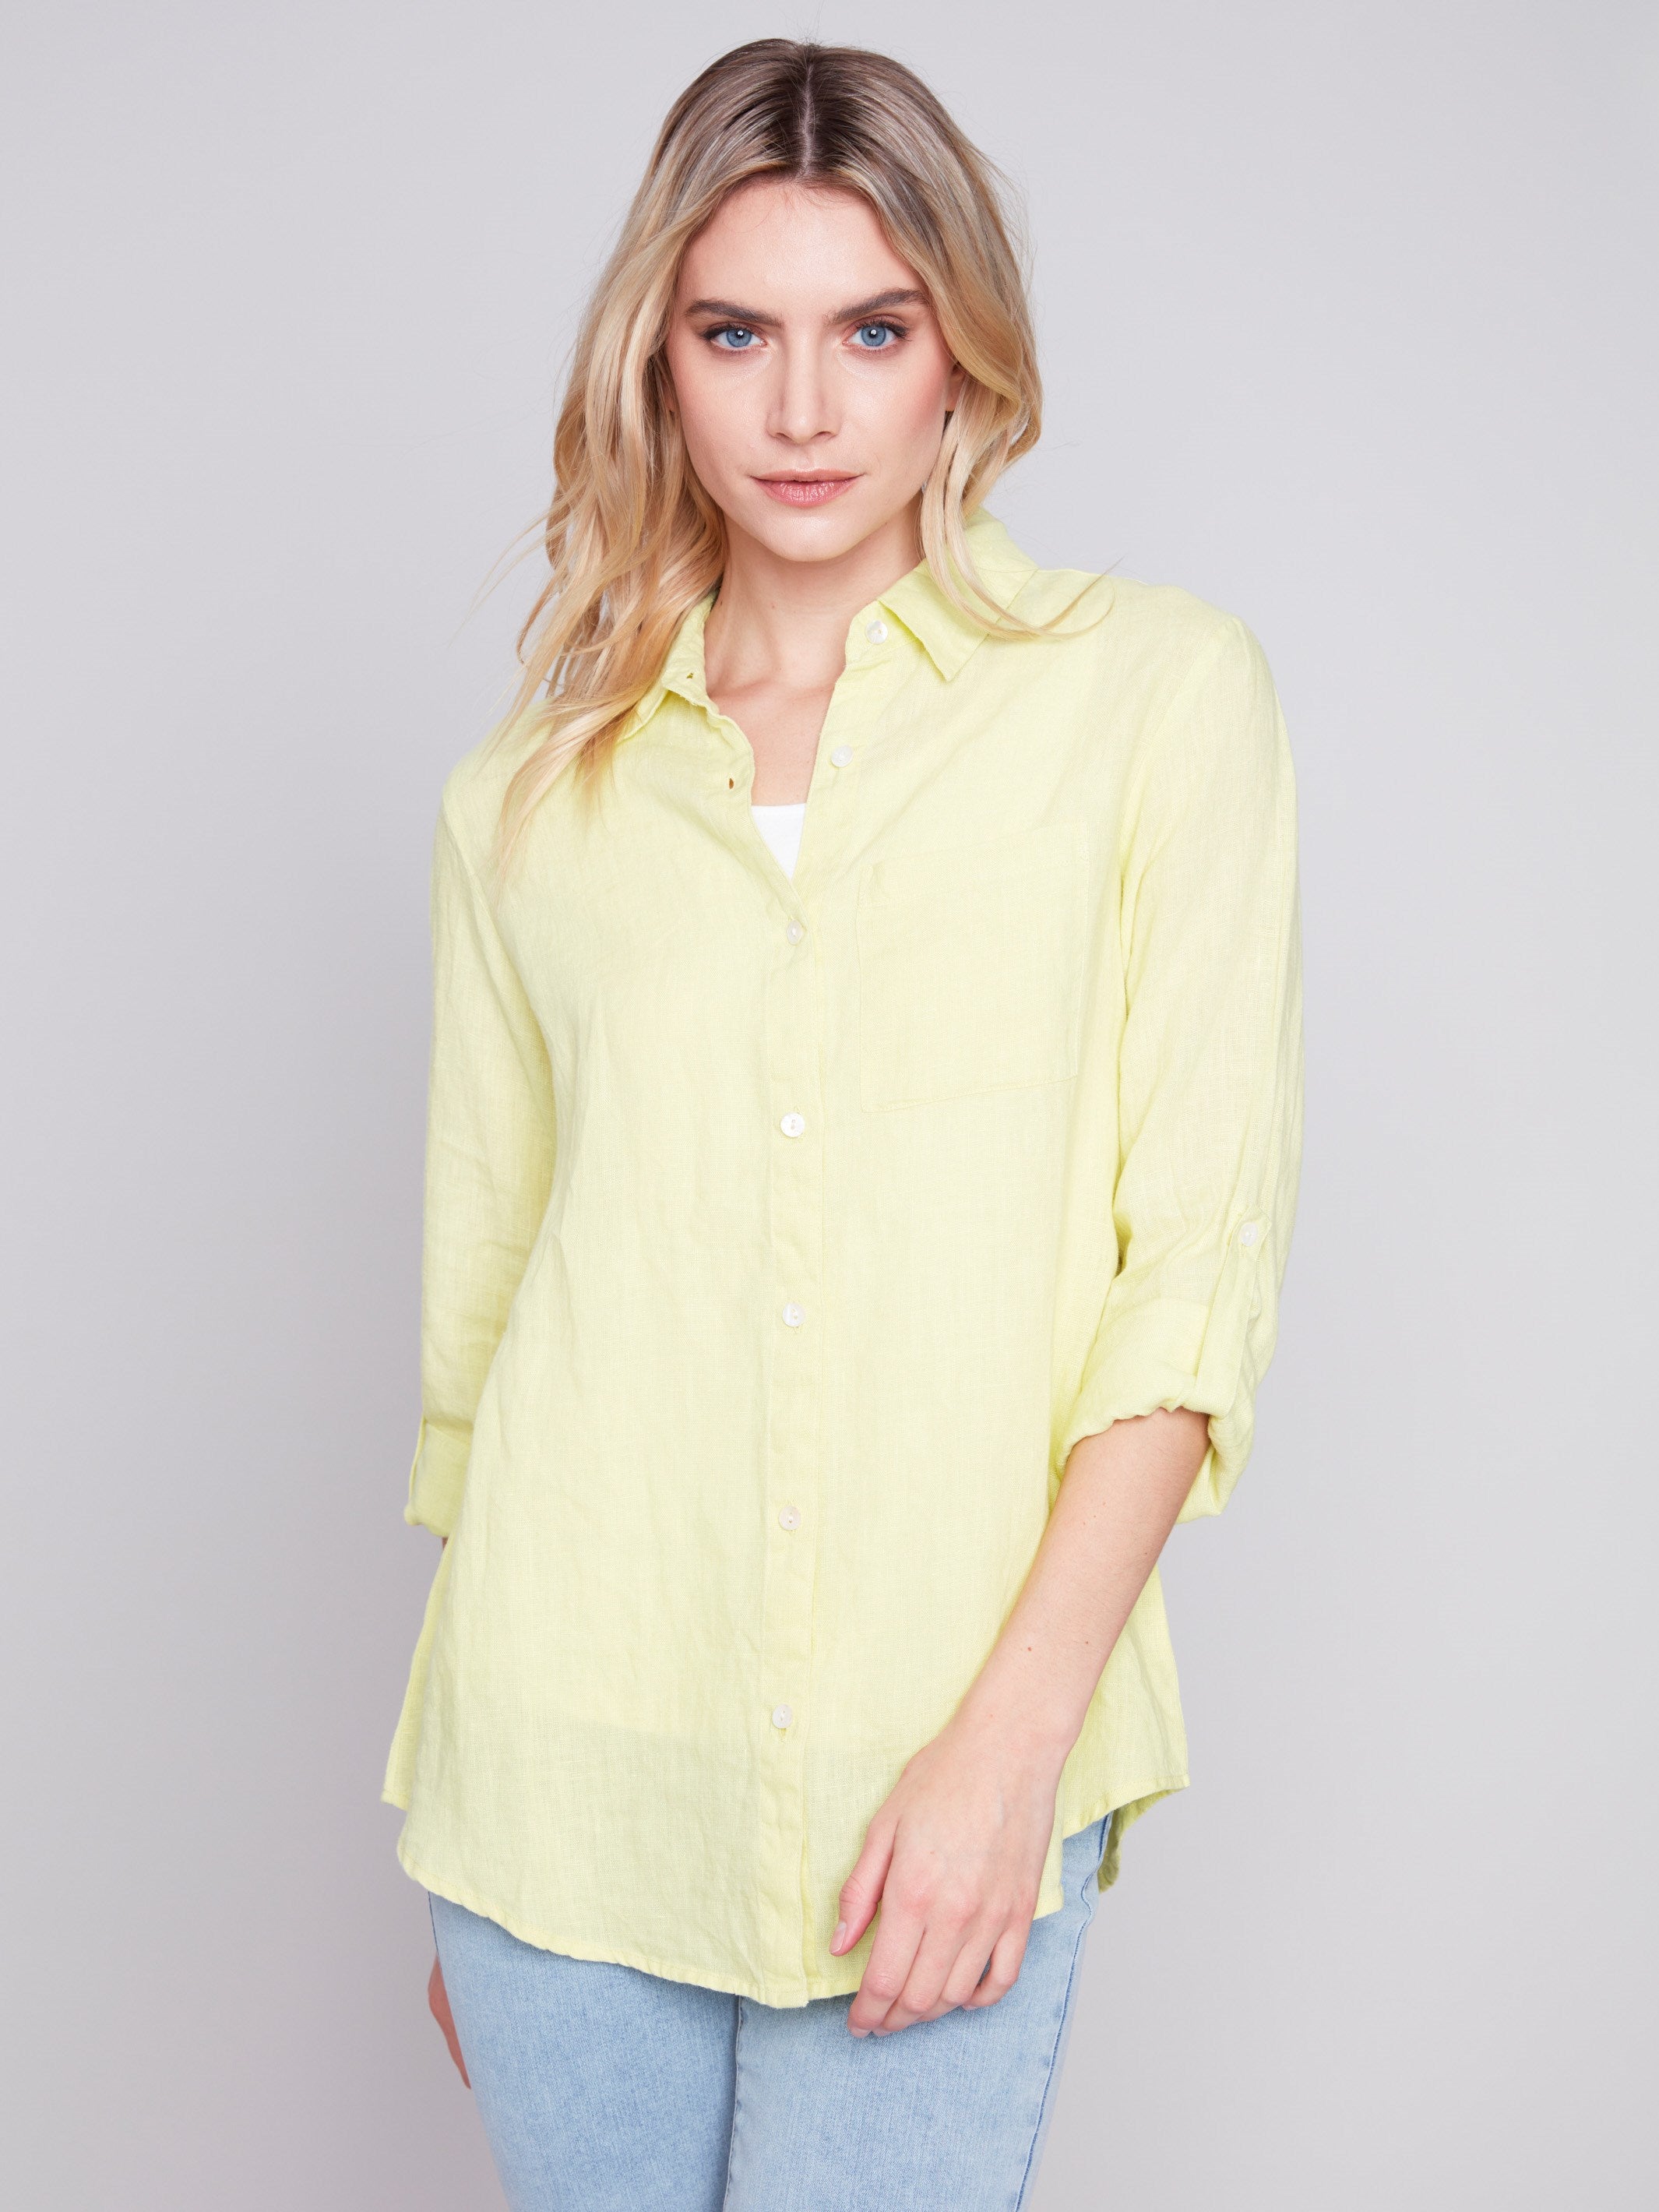 Long Linen Shirt - Anise - Charlie B Collection Canada - Image 4